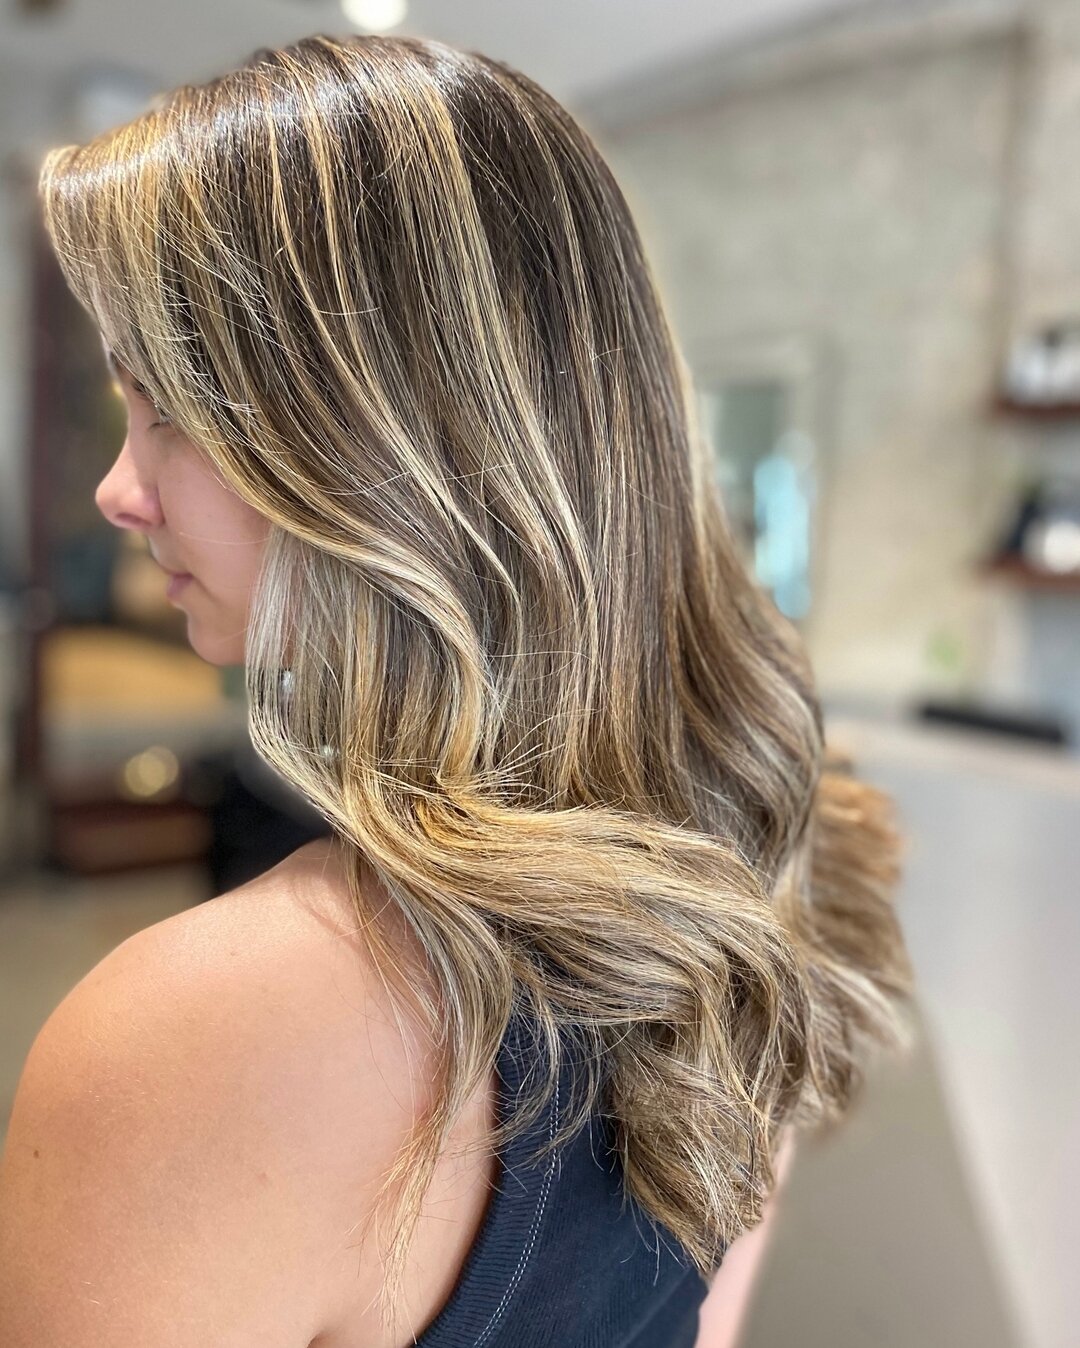 Talk about a transformation 🤤 bringing our client back to the light side with foils that keep it low maintenance while creating a big impact 💘💗 by @shelby_allaboutsalon using @evopro #hueverse ✨✨✨✨

#livedincolour #balayage #sydneysalon #sydneyhai